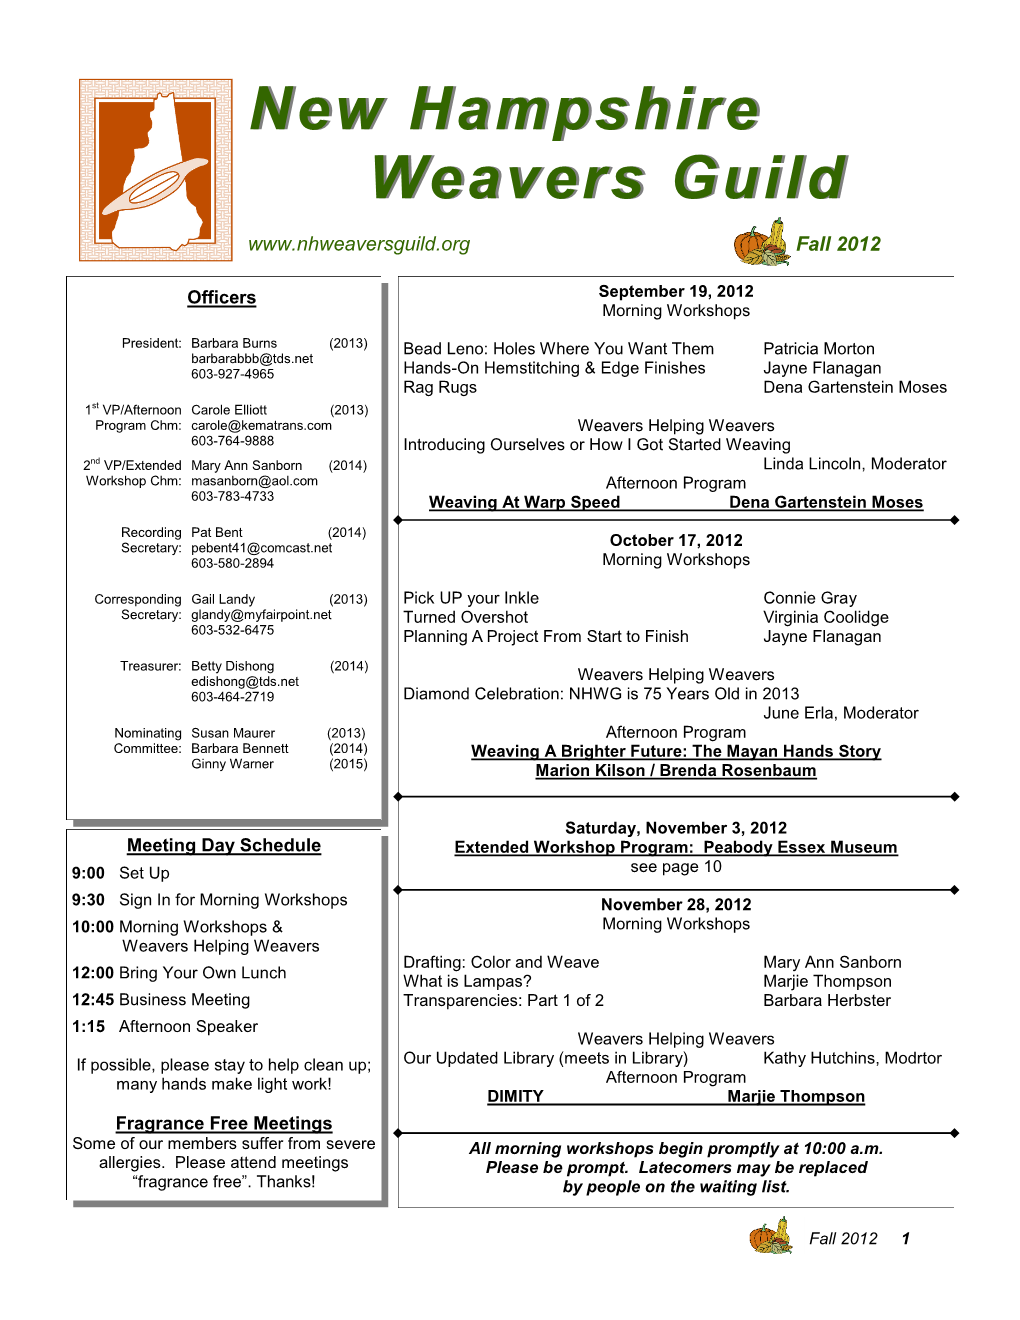 New Hampshire Weavers Guild in Good Standing for at Least a Year